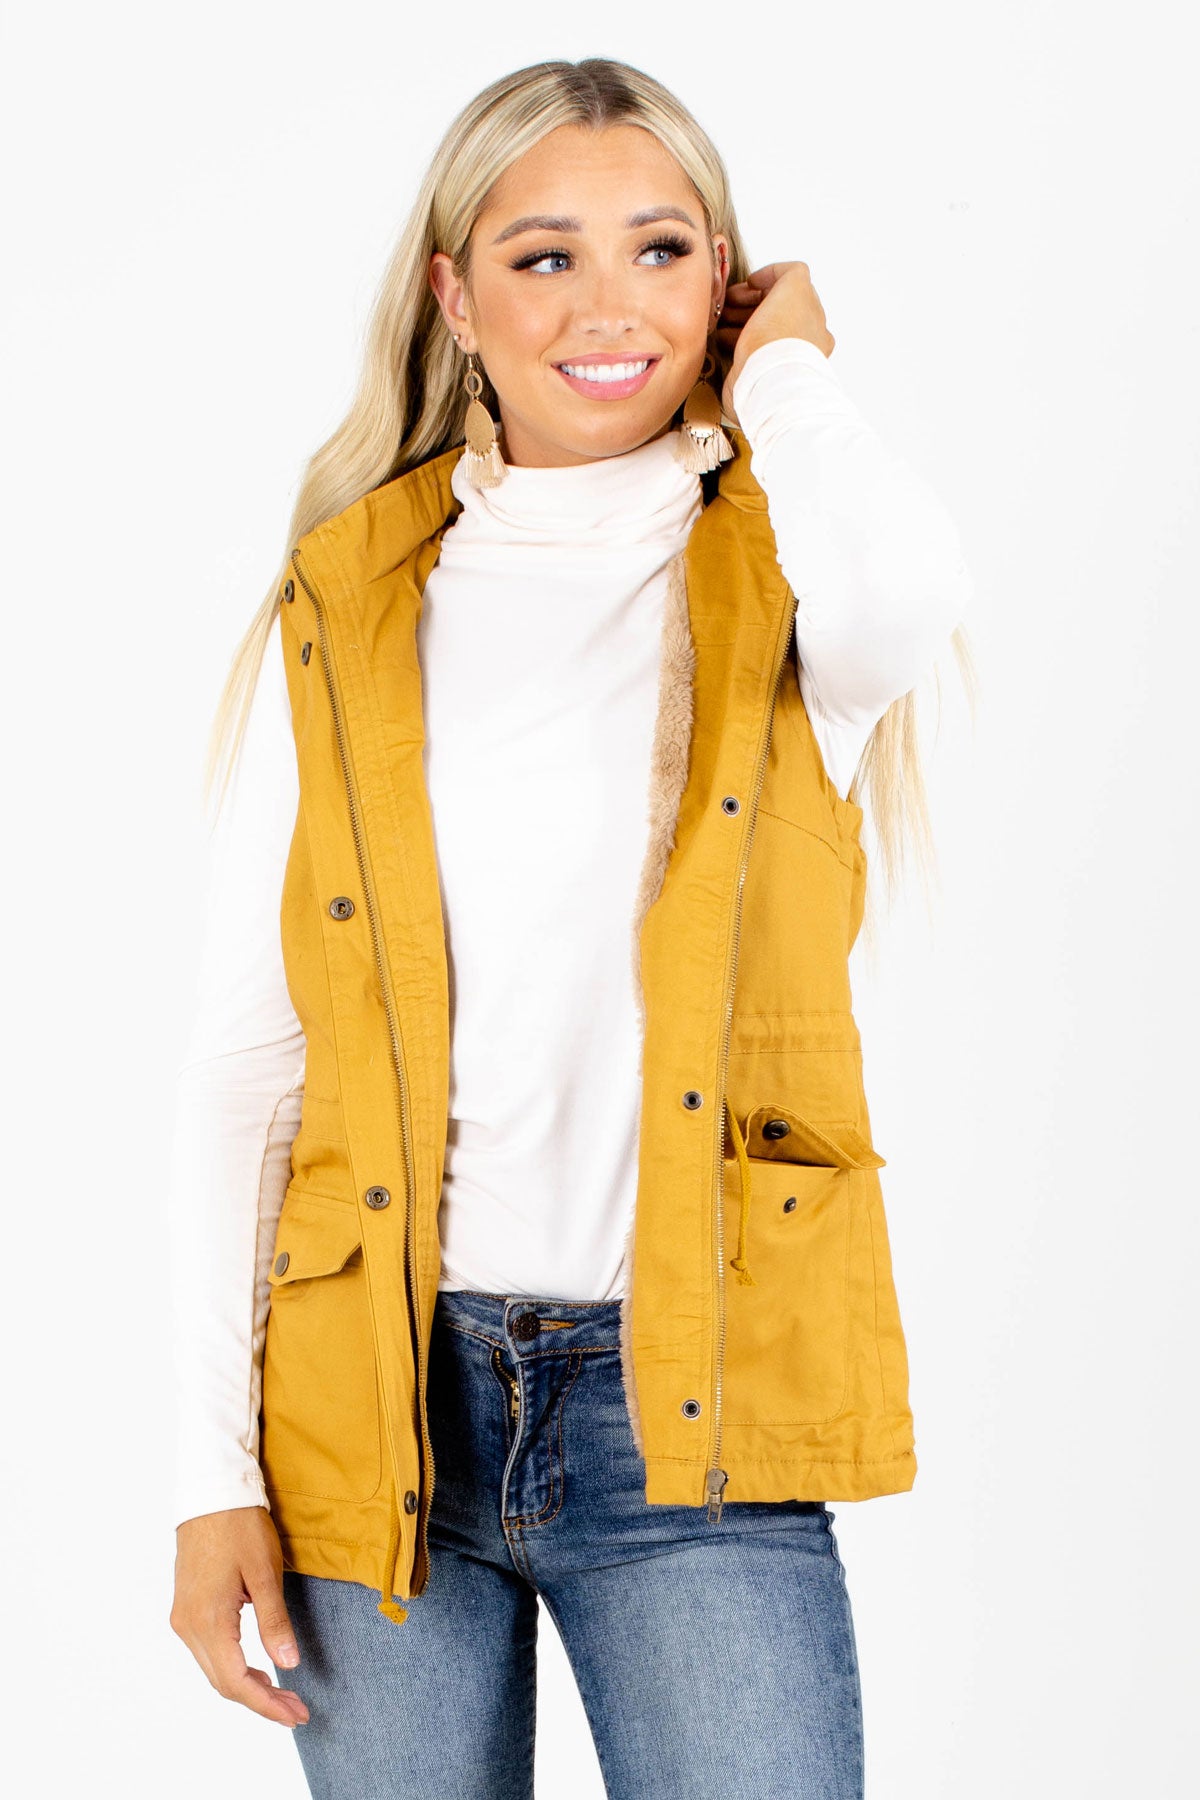 Mustard Cute and Comfortable Boutique Vests for Women